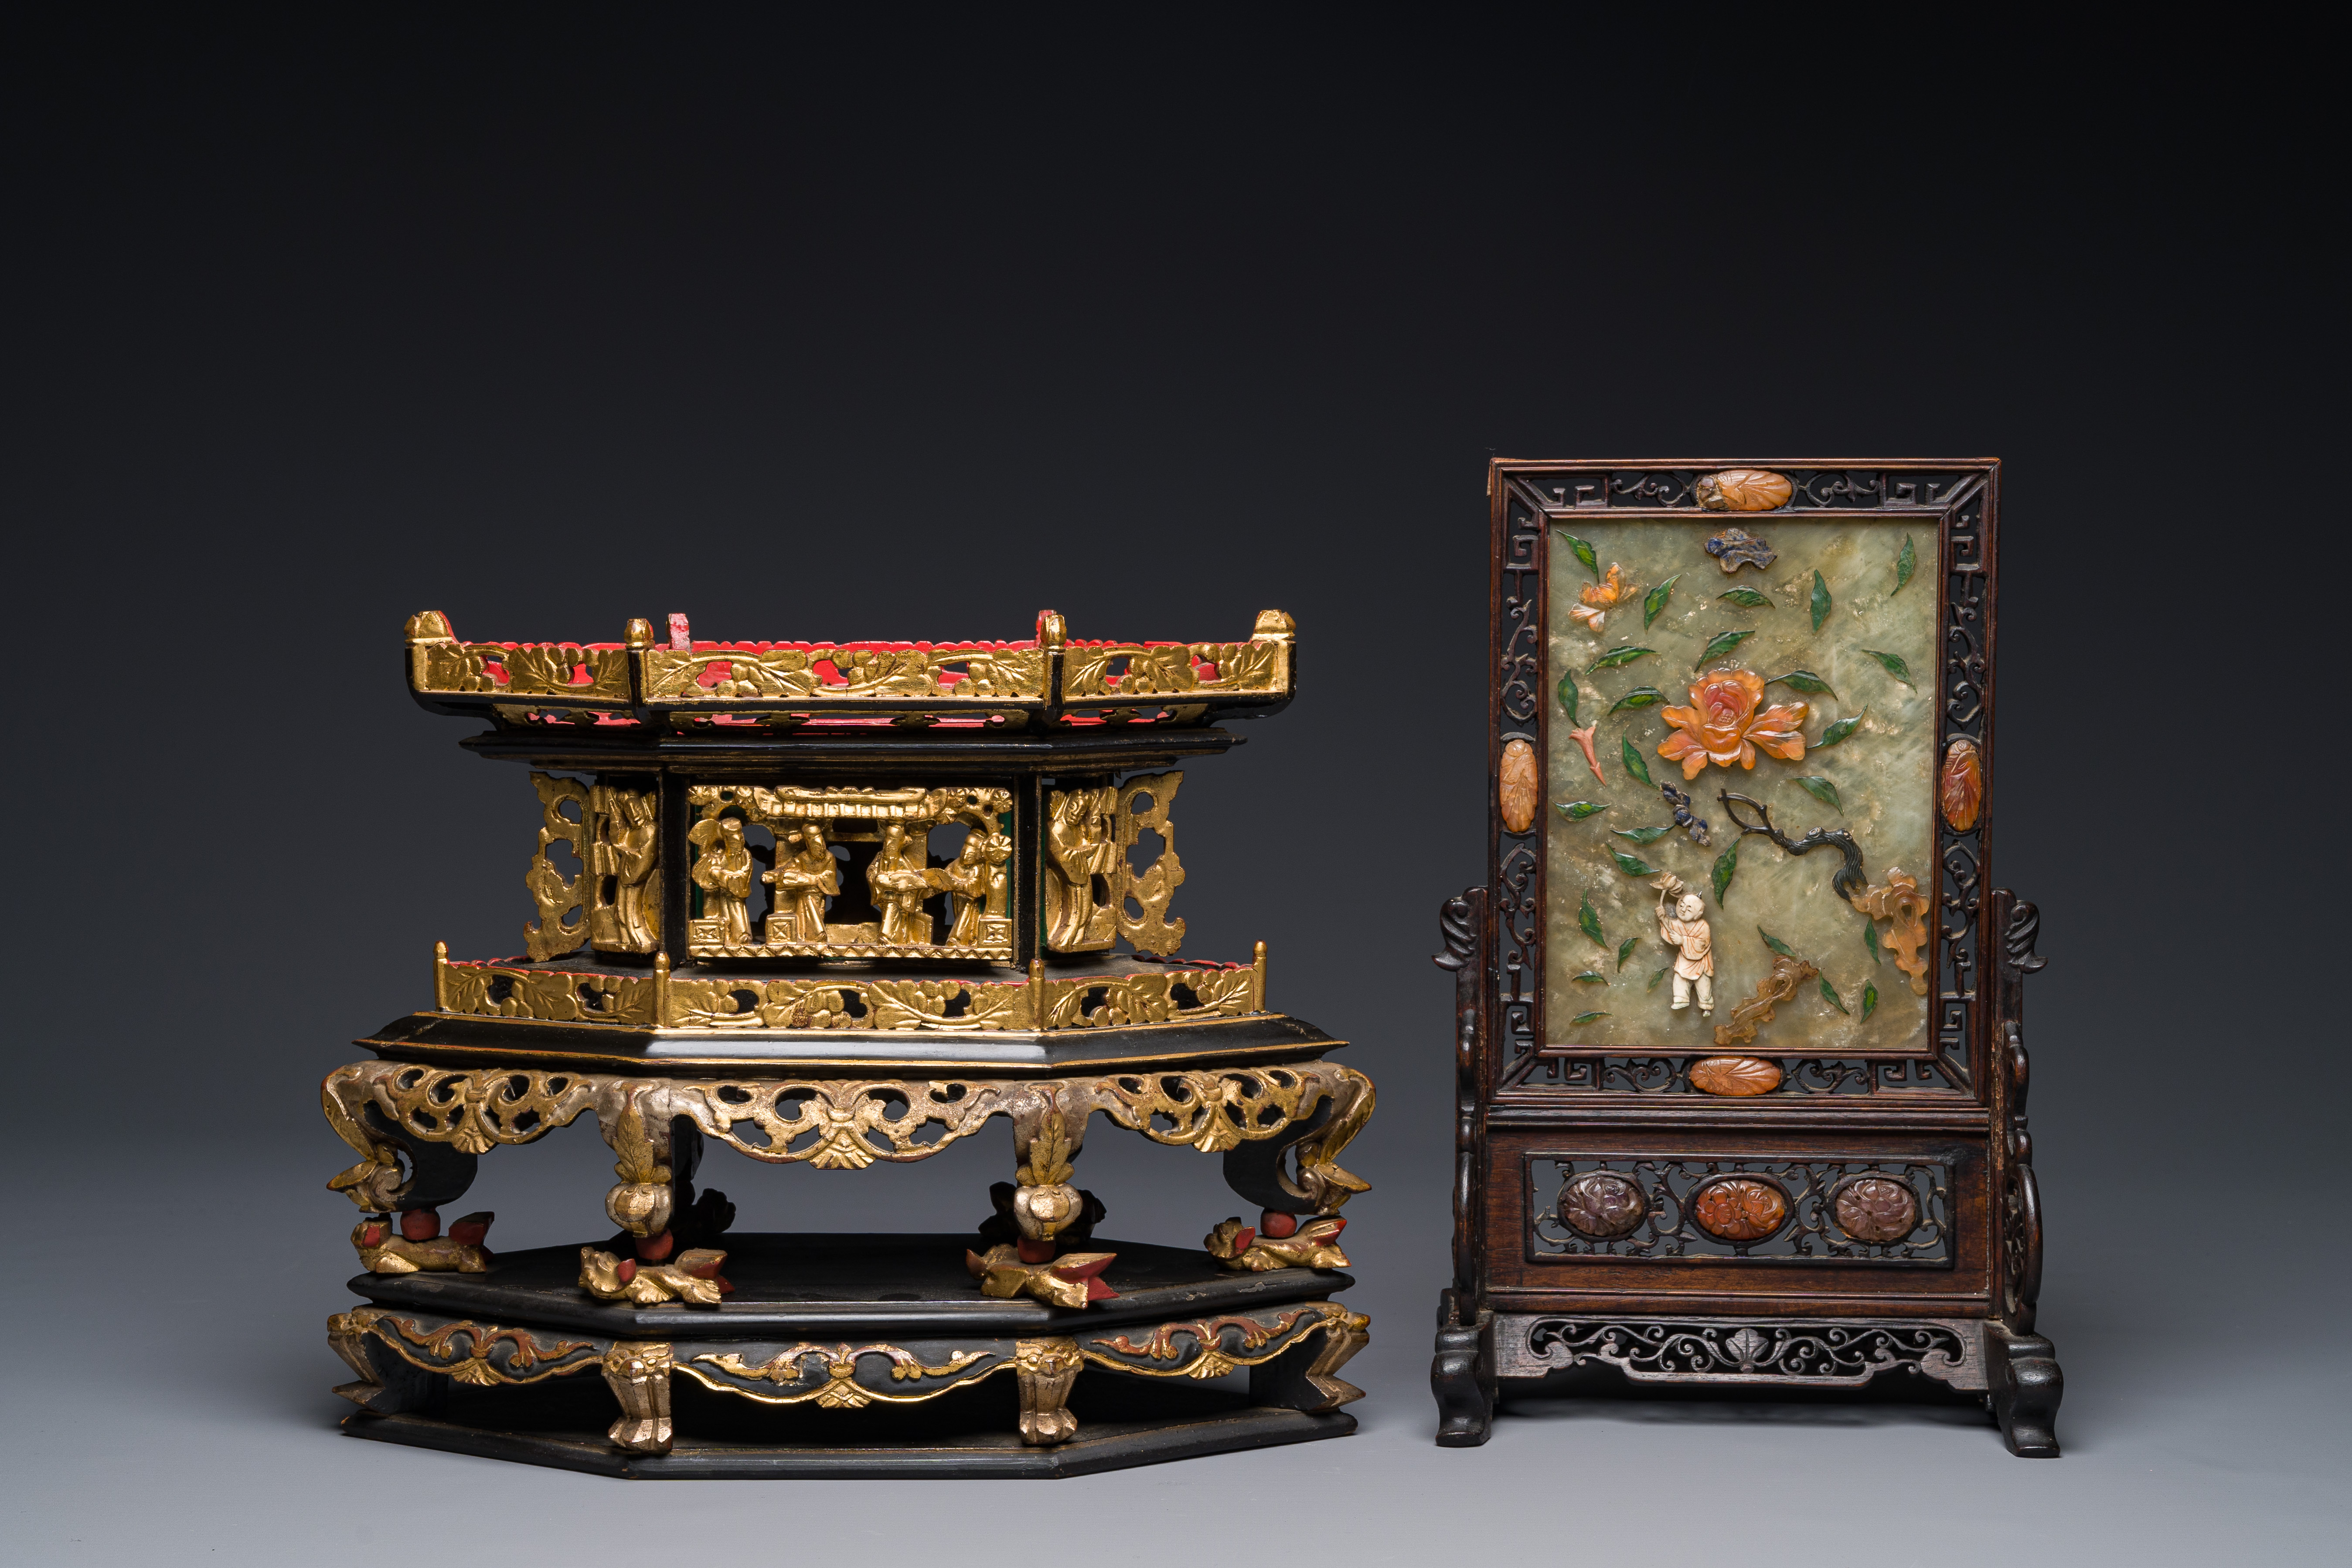 A Chinese wooden table screen with precious stones and an altar piece or 'chanab' for the Straits or